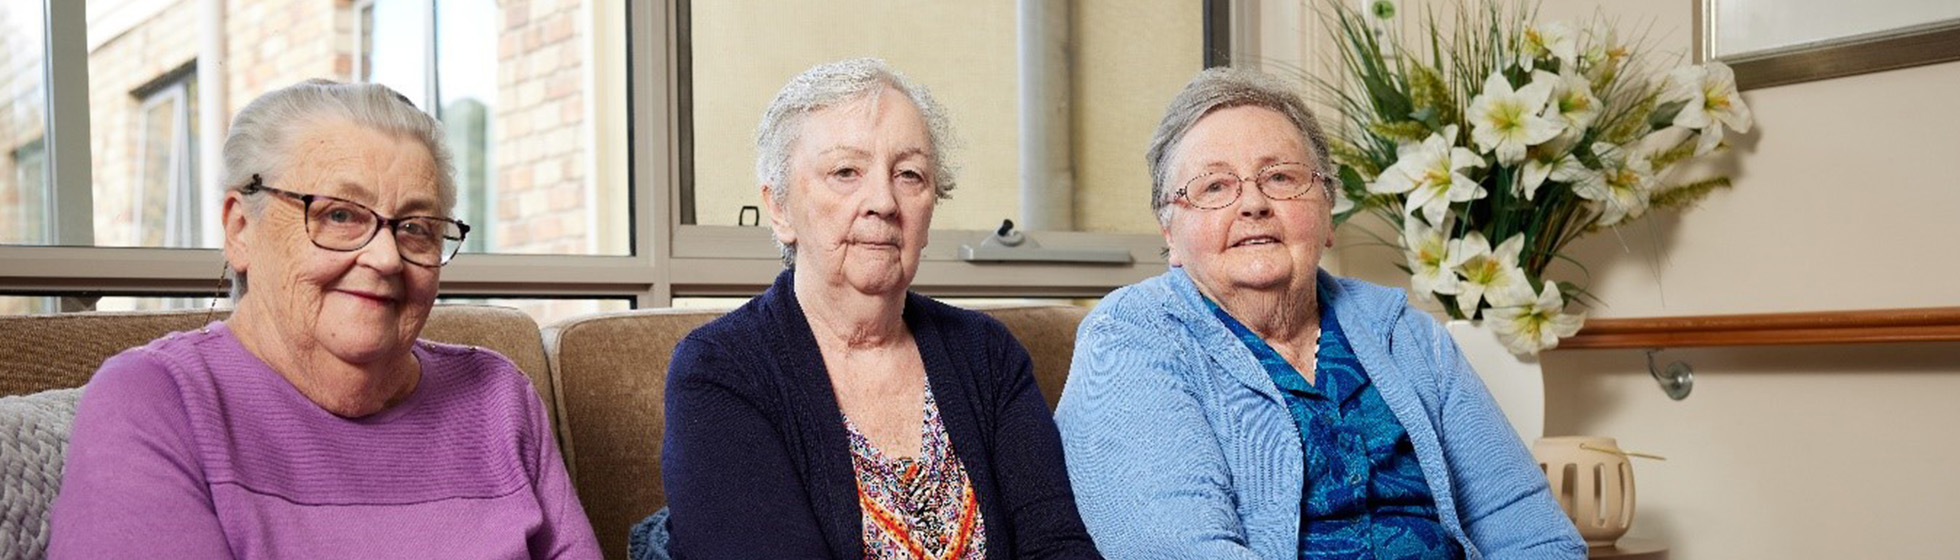 three elderly sisters sitting on a couch together in an aged care home